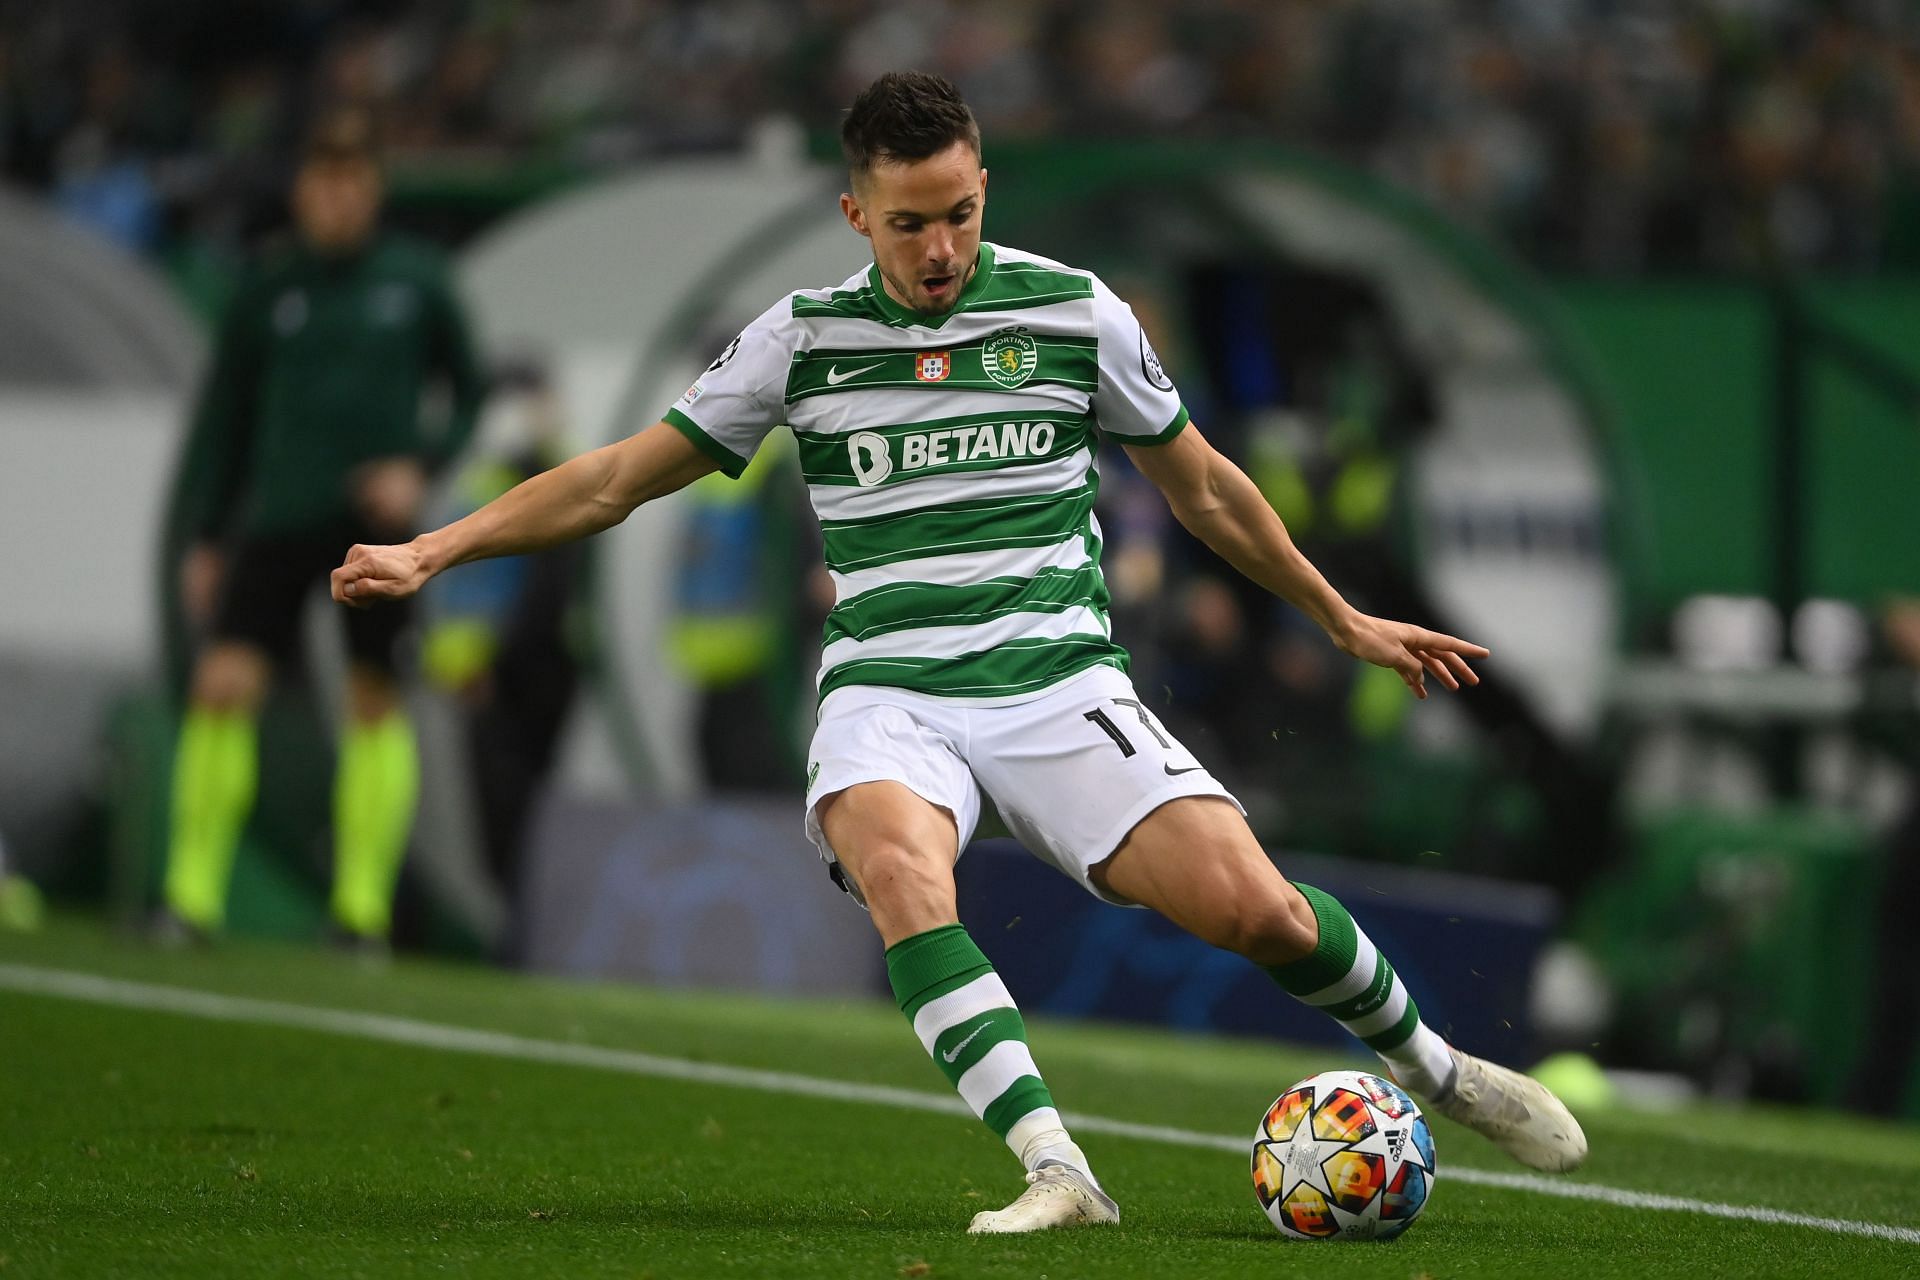 Sarabia moved to Sporting CP as a loanee this year